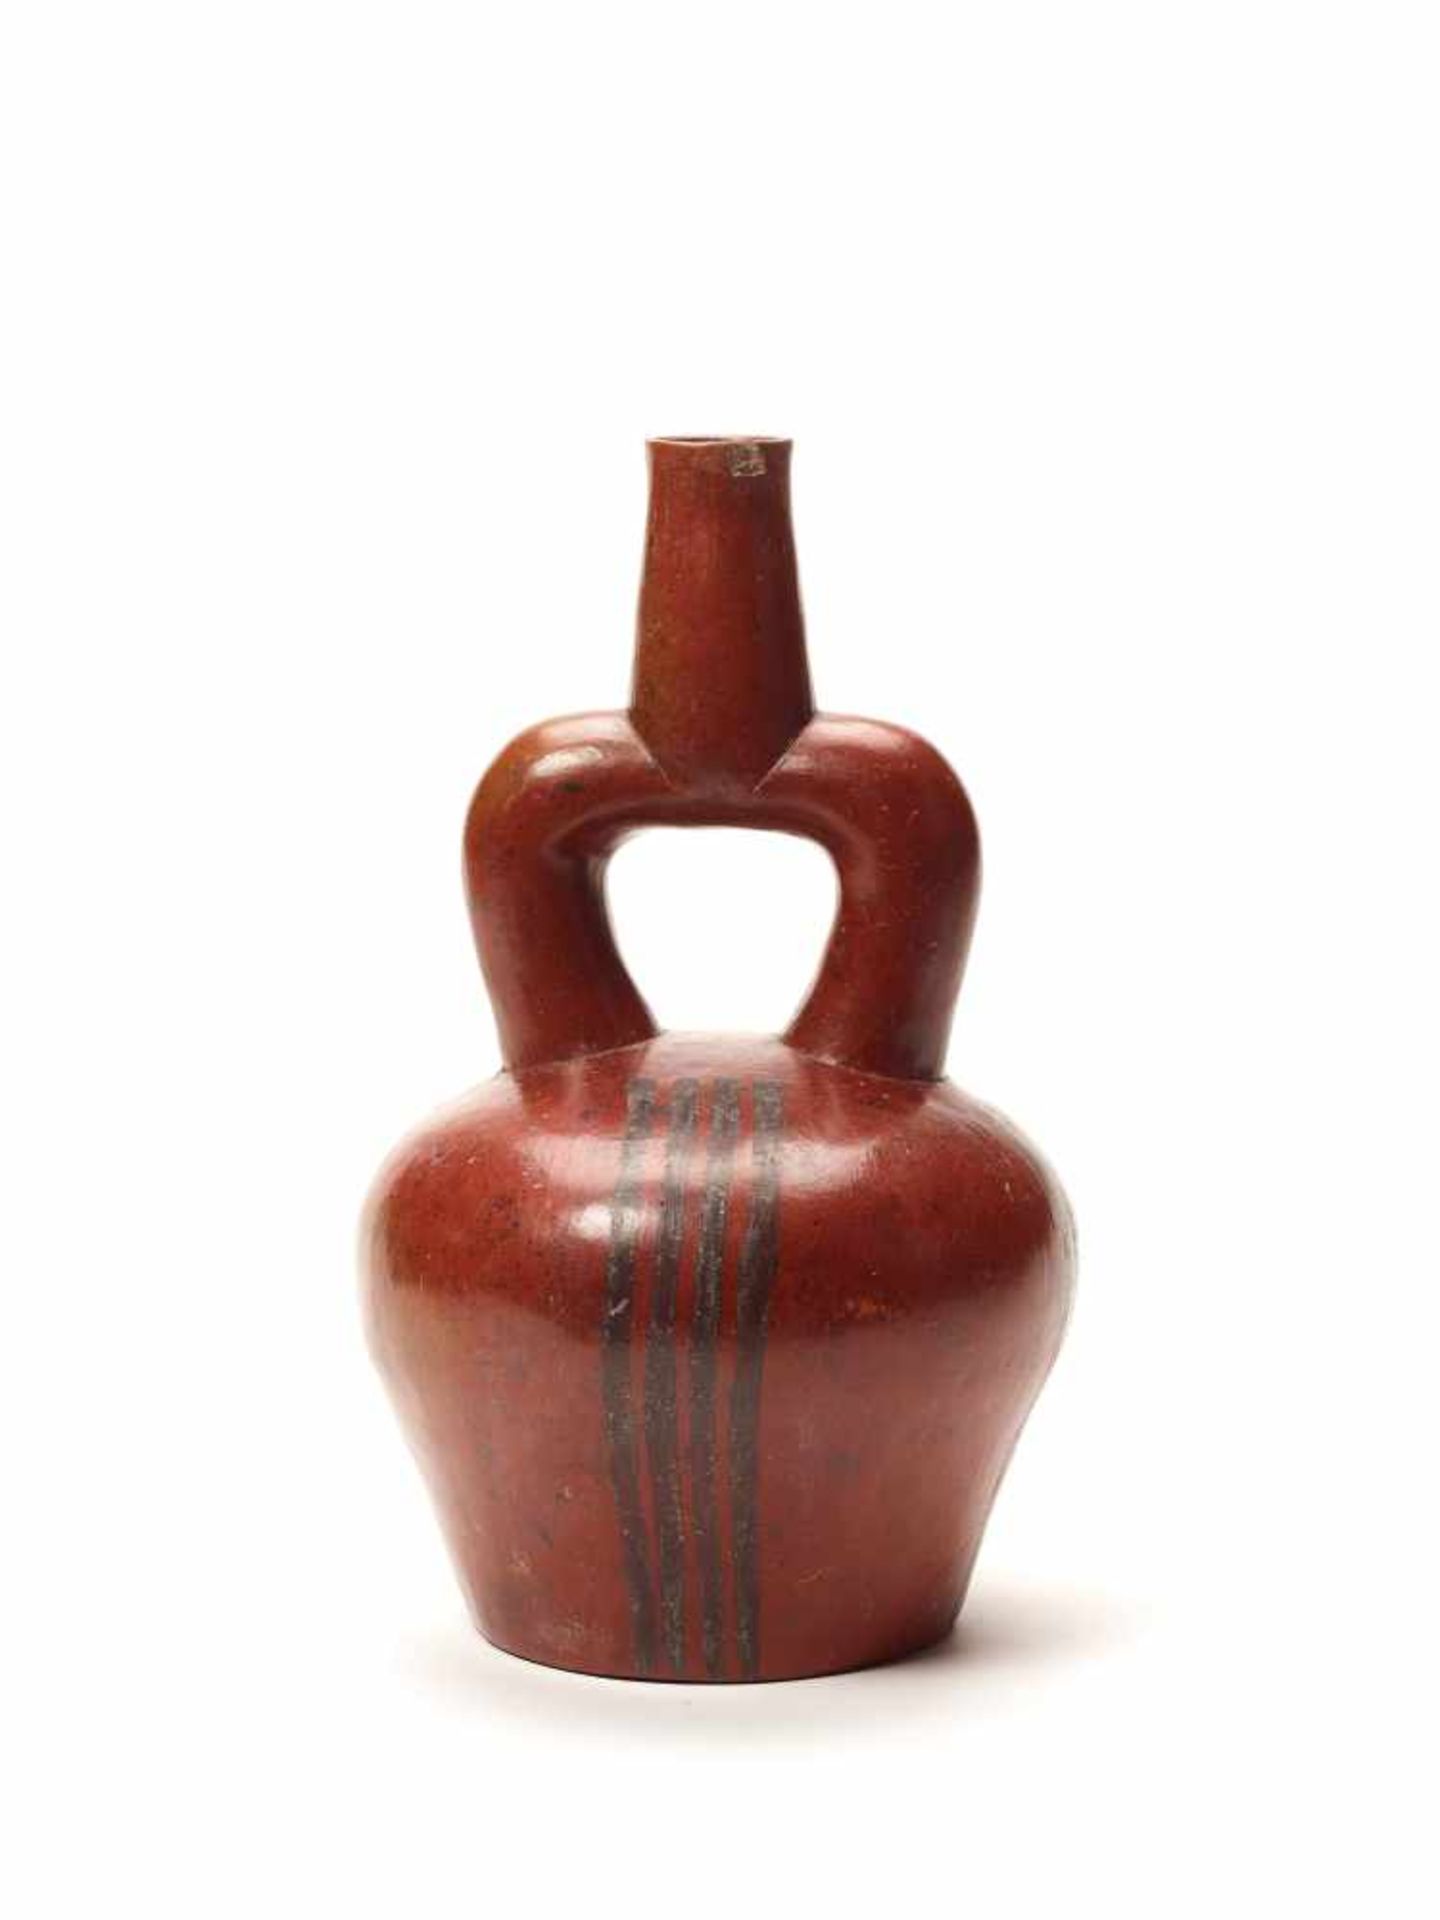 TL TESTED REDDISH STIRRUP VESSEL - CHAVIN CULTURE, PERU, C. 1ST CENTURY BCPainted fired clayChavin - Image 2 of 3